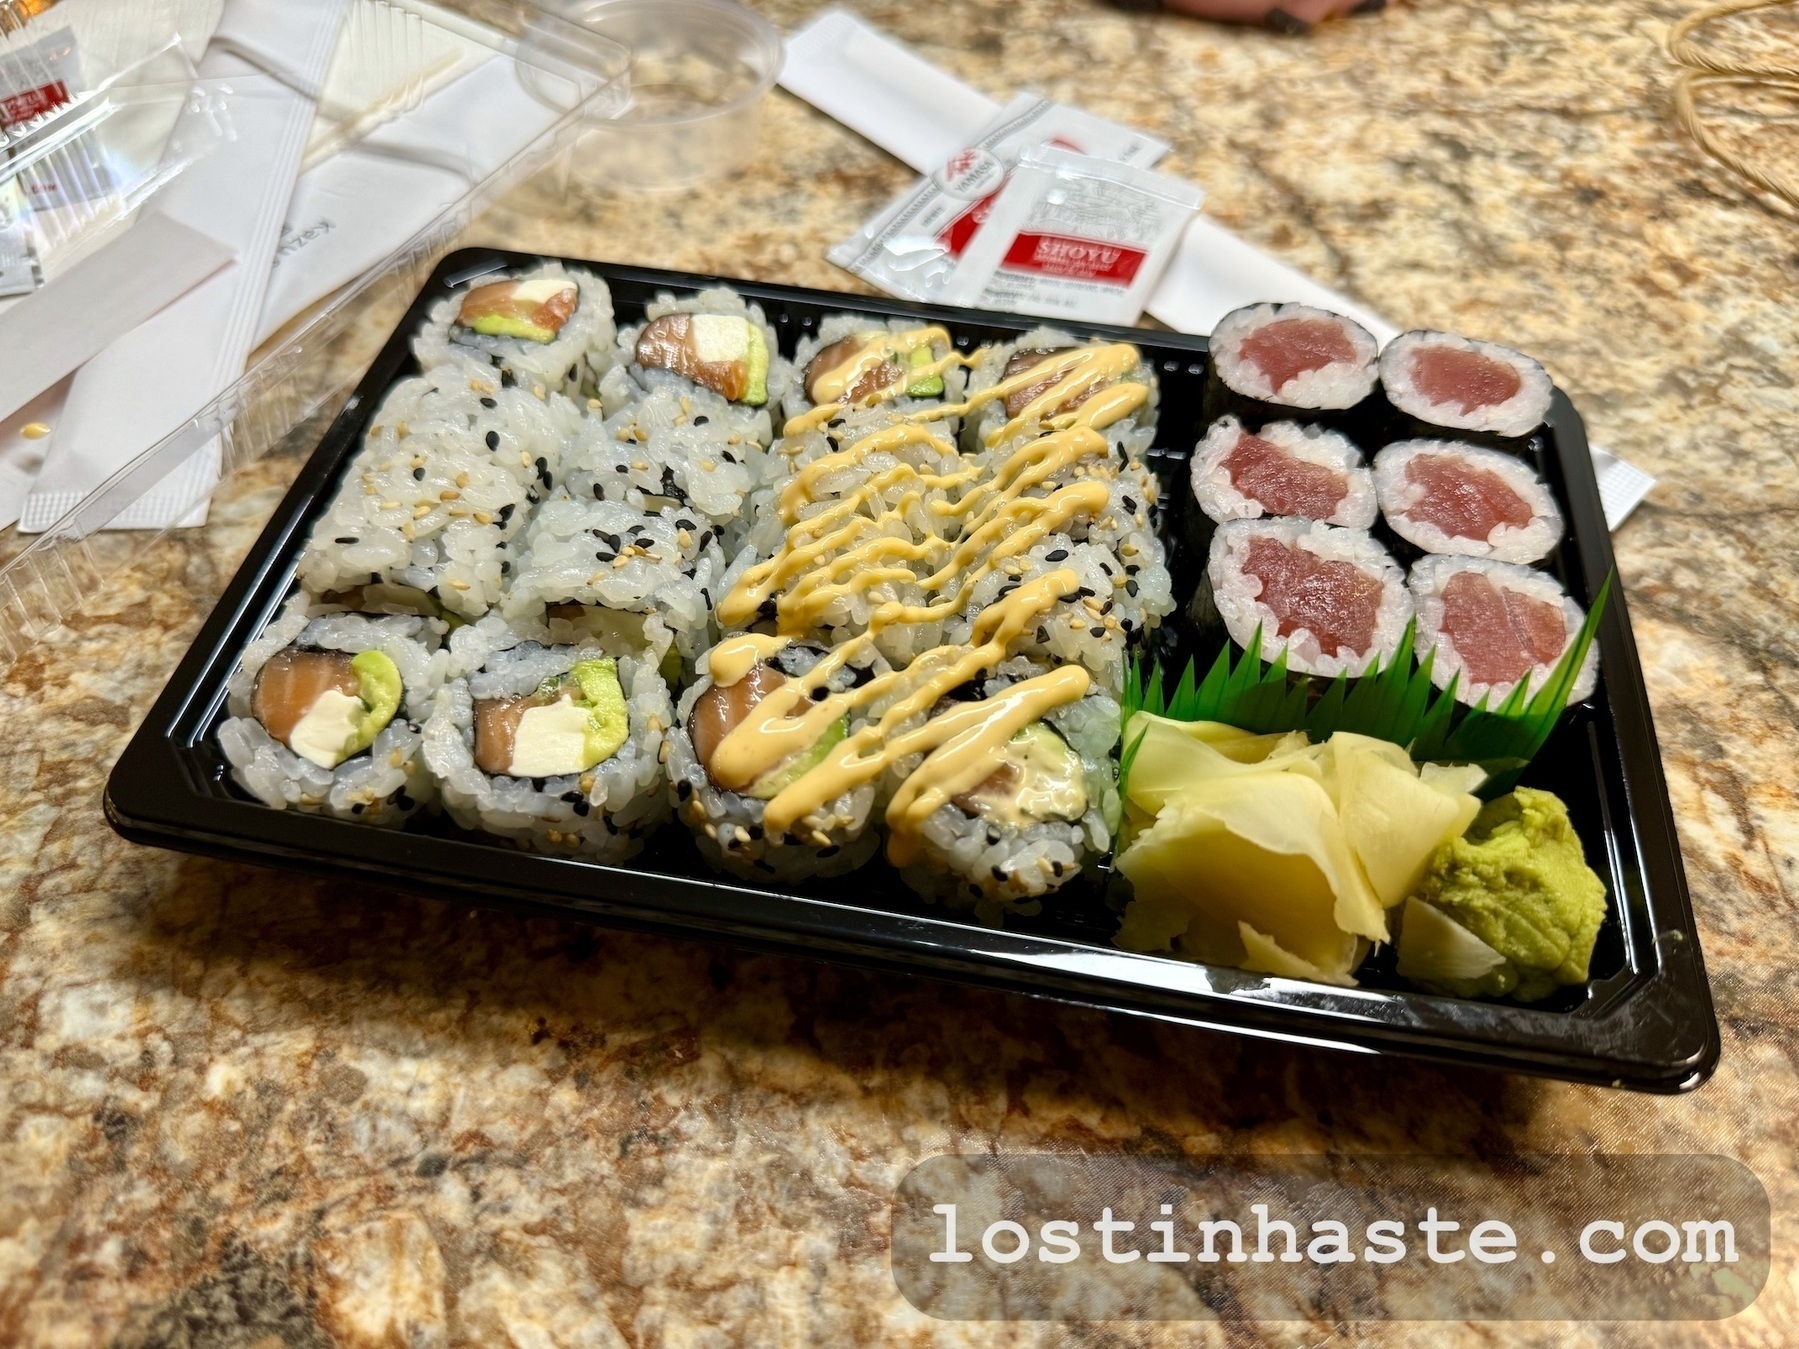 Assorted sushi in a plastic tray featuring rolls with avocado, fish, and drizzled sauce, alongside ginger and wasabi, on a kitchen counter with packets and a website URL: lostinhaste.com.